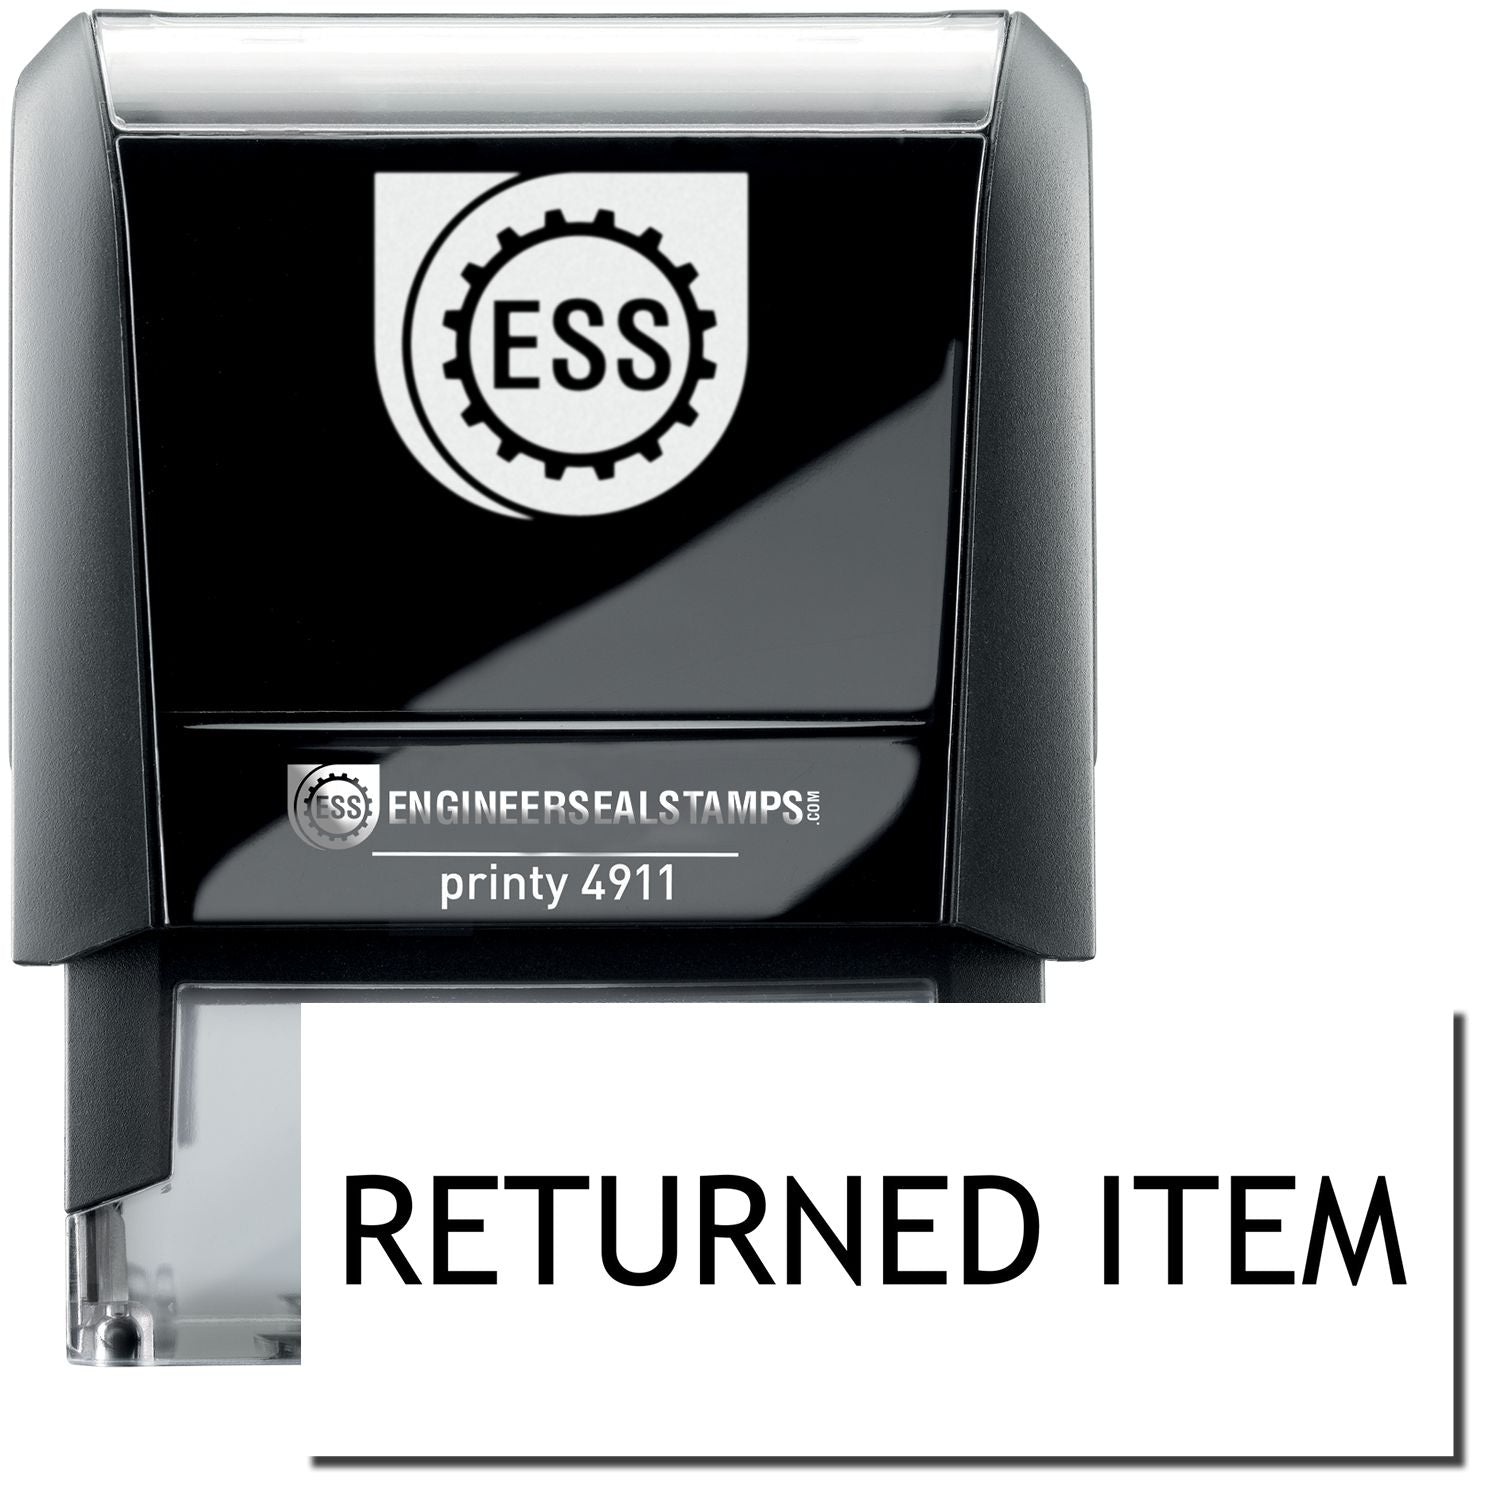 A self-inking stamp with a stamped image showing how the text "RETURNED ITEM" is displayed after stamping.